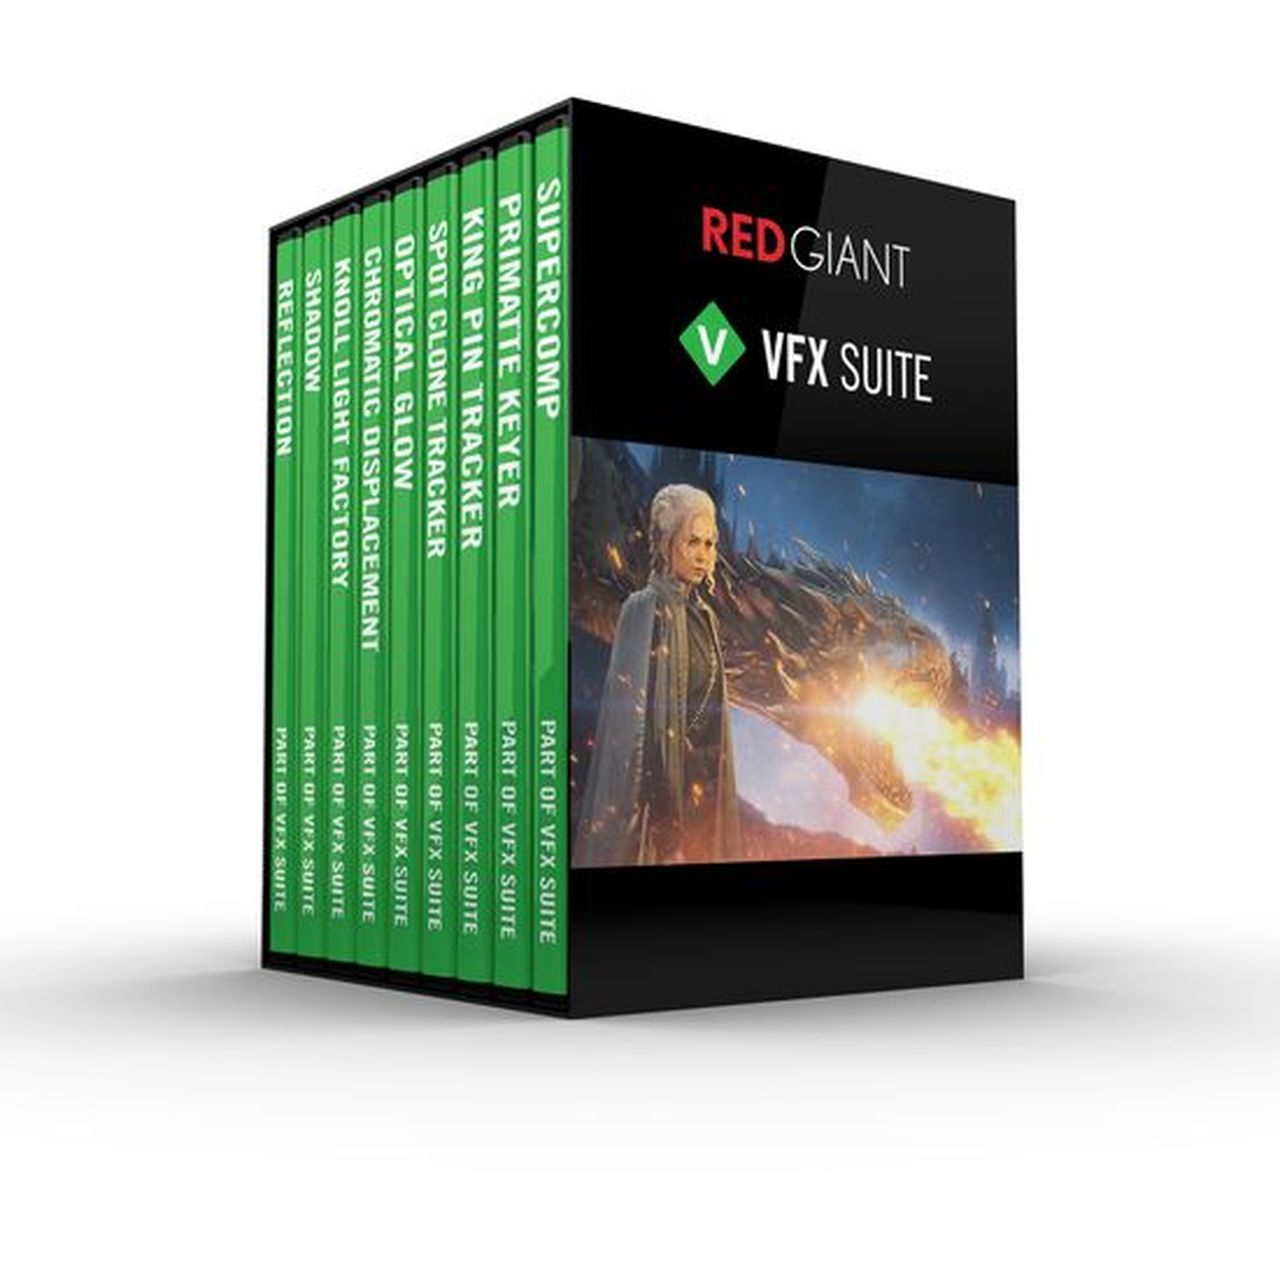 red giant vfx suite serial